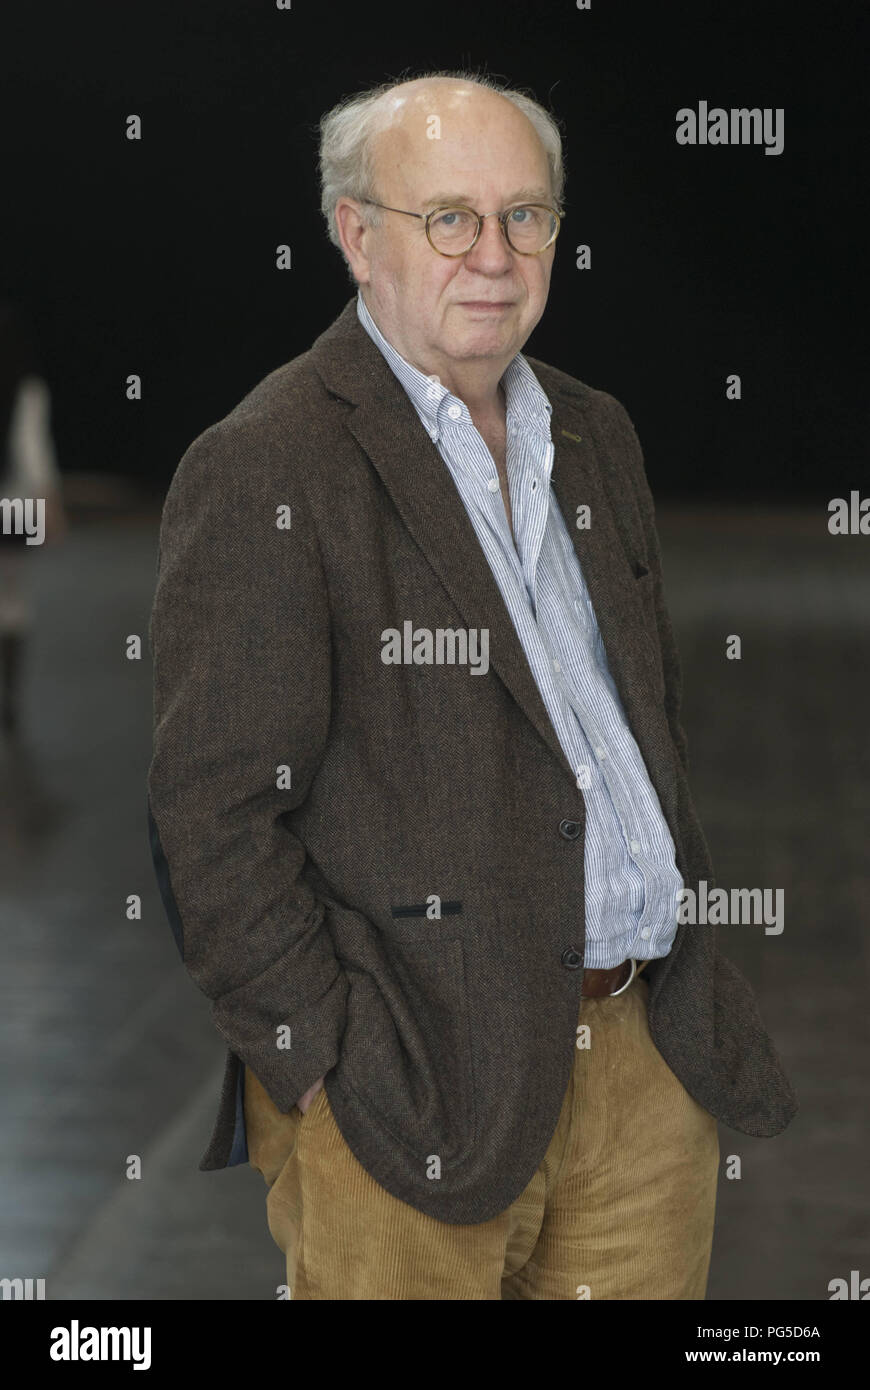 Leipzig, DEU, 13.03.2015: Portrait Rolf Hosfeld (Germany). born in 1948, is a cultural historian, author and since 2011 scientific director of Lepsius House in Potsdam Stock Photo